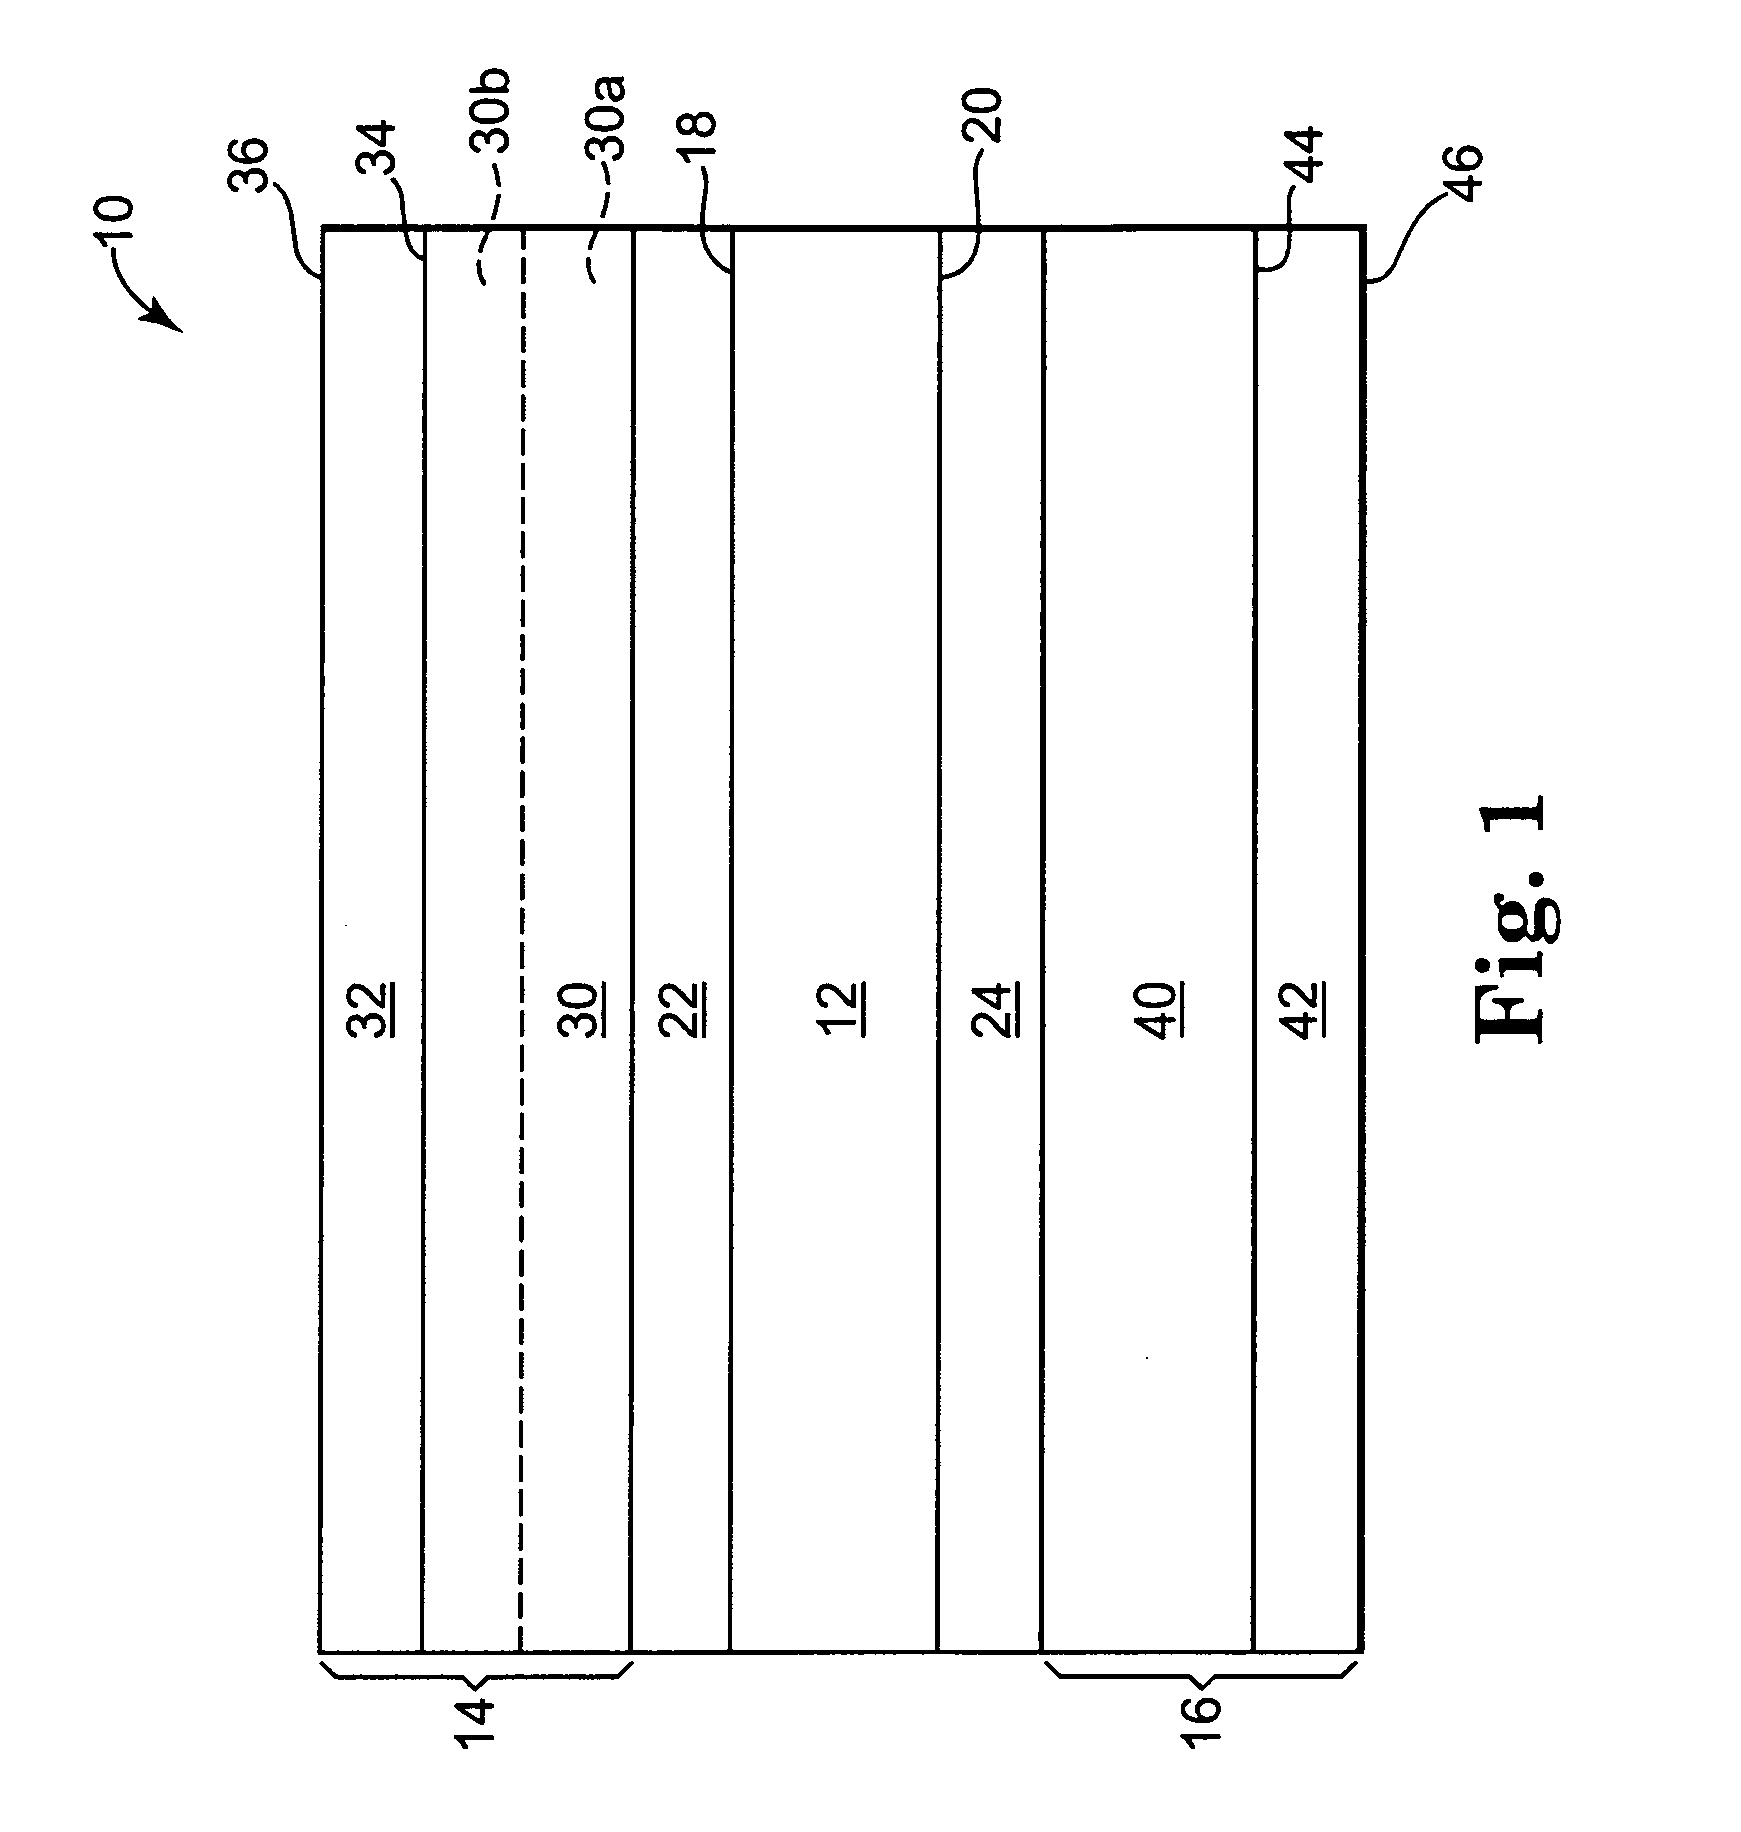 Magnetic recording medium with dual magnetic sides and having a low resistivity